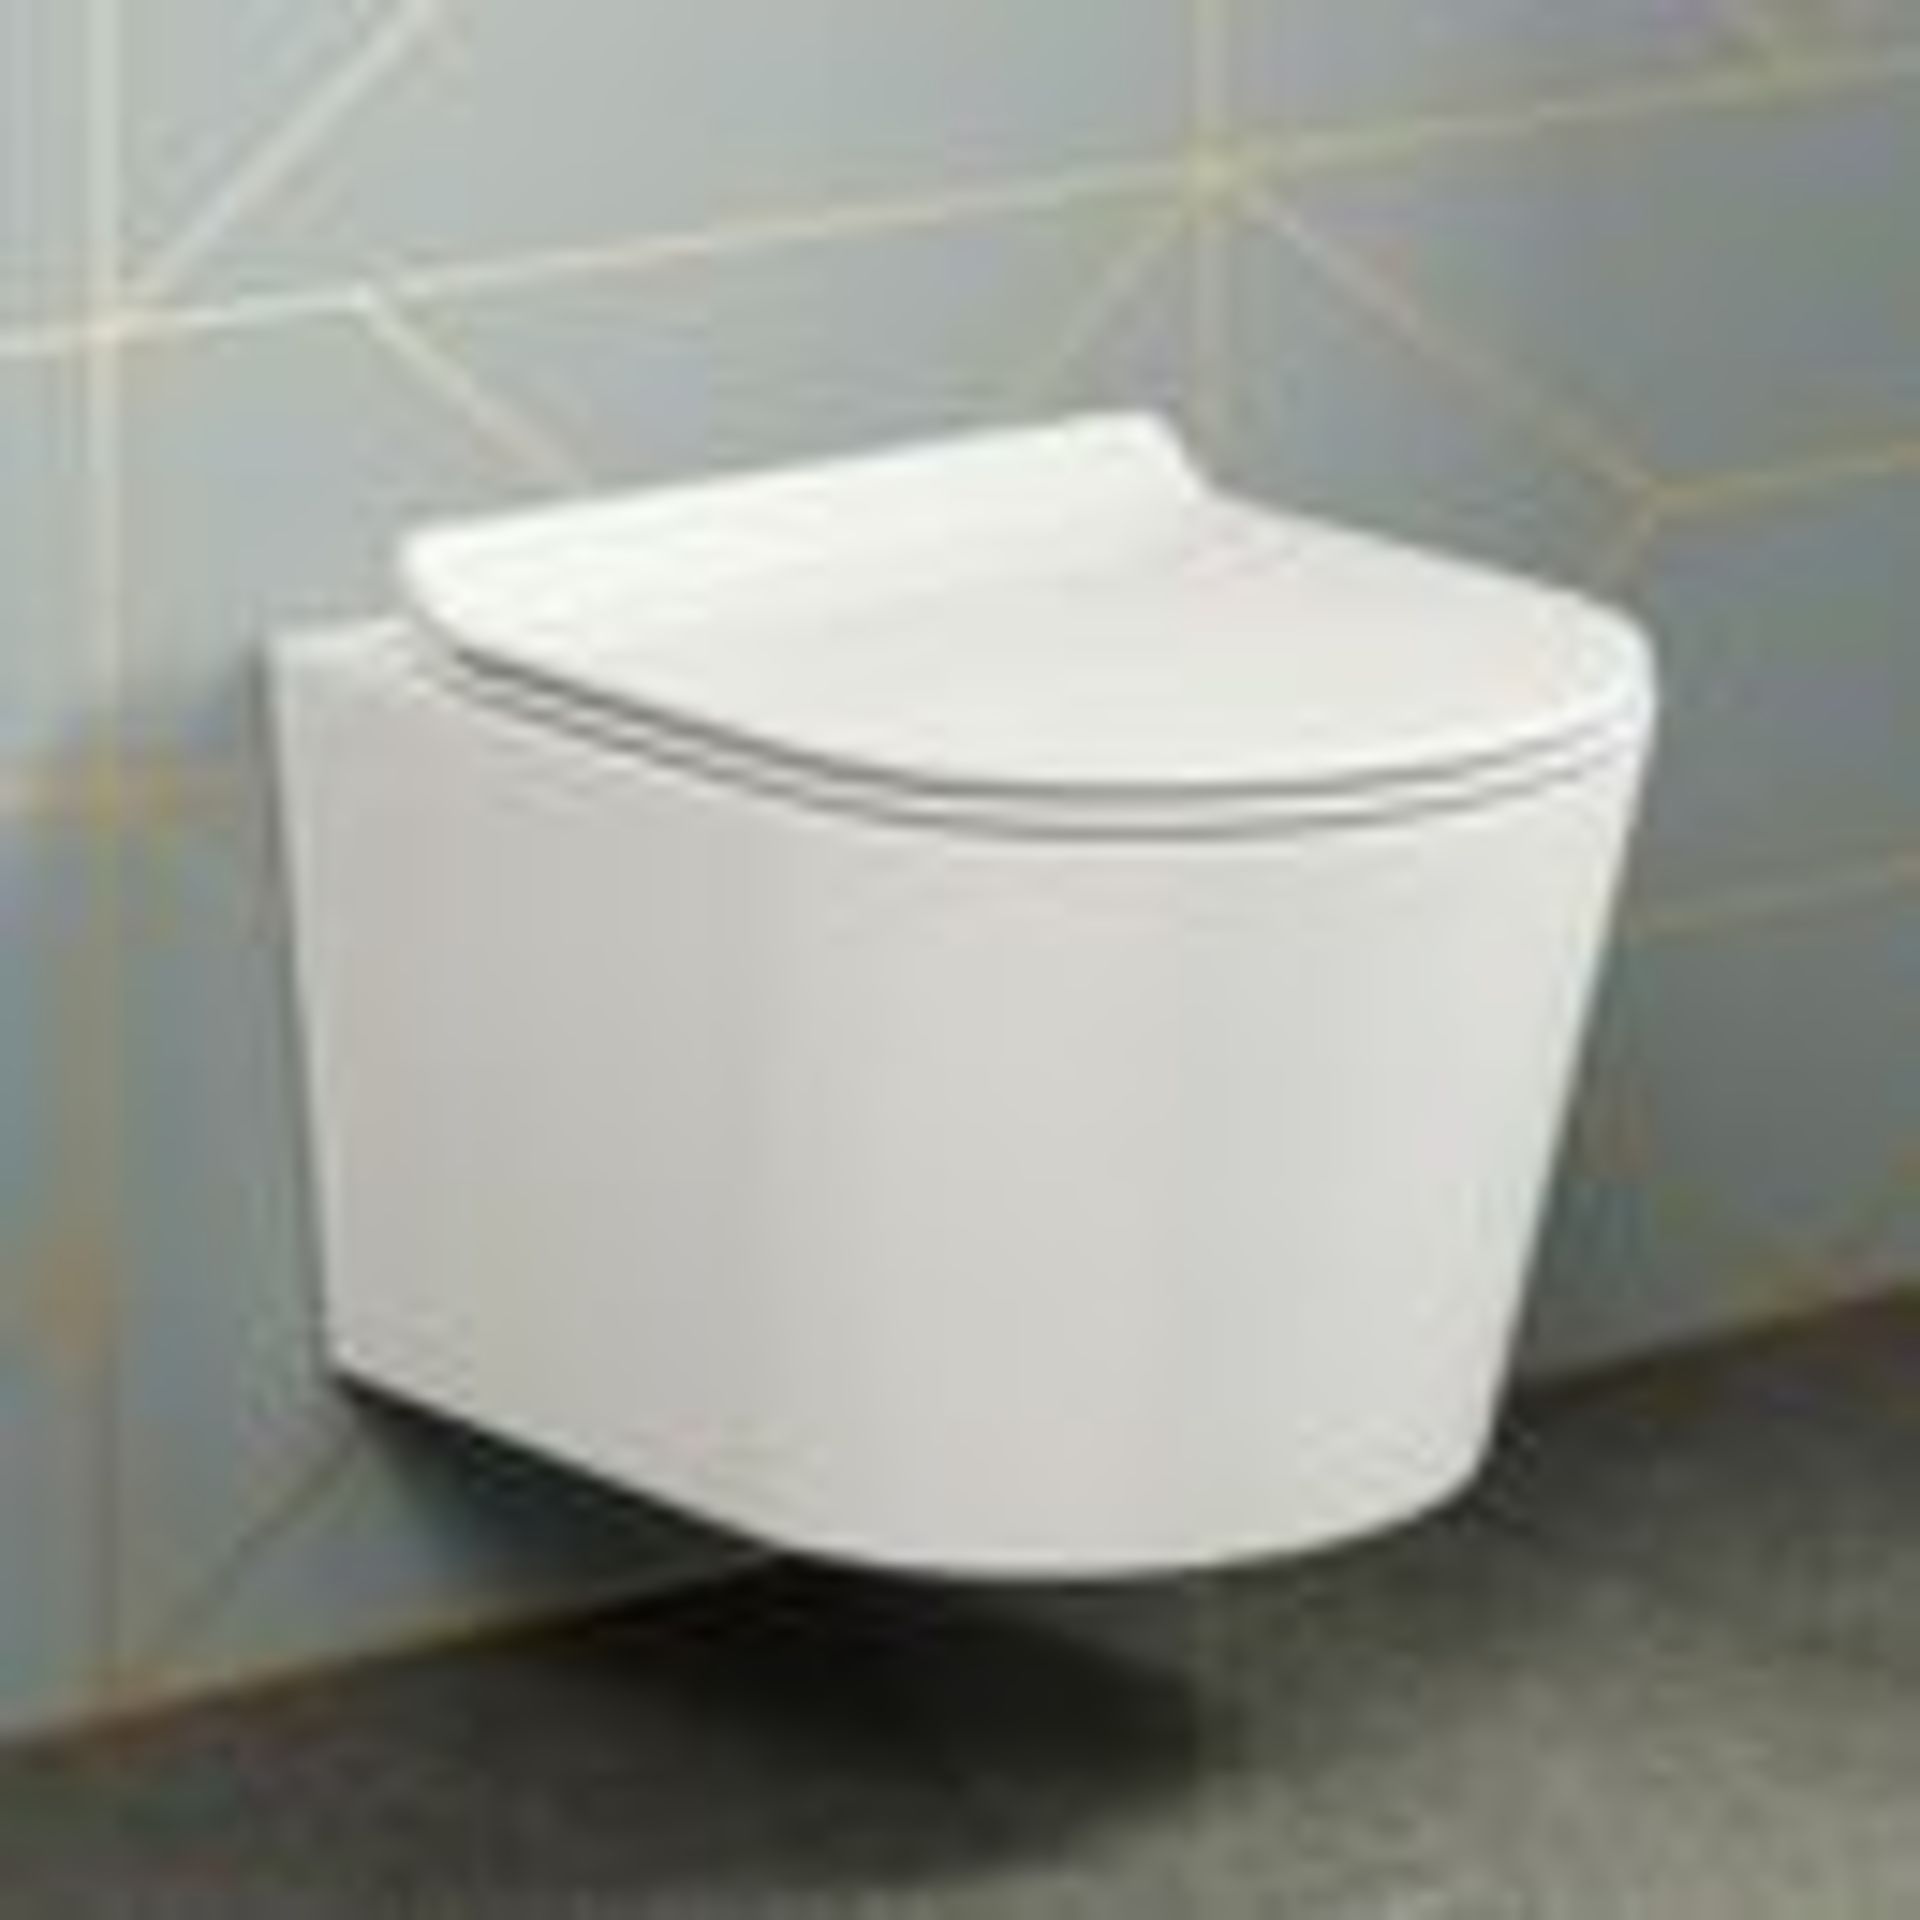 NEW & BOXED Lyon Wall Hung Toilet inc Luxury Slim Soft Close Seat. Our Lyon back to wall toile...